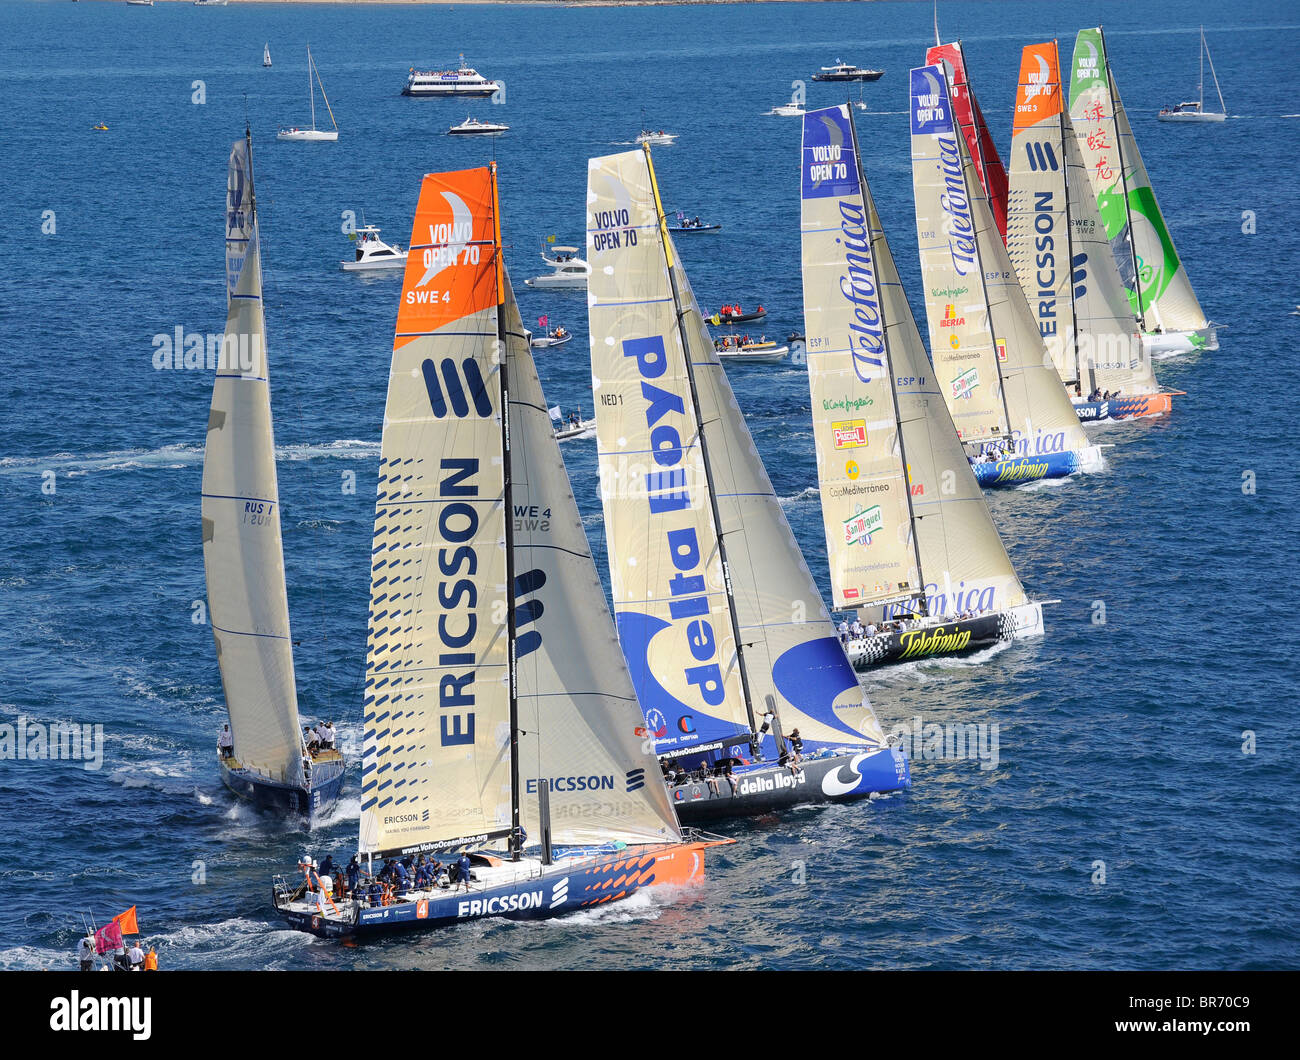 Startline of the In-port Race 1, Alicante, Spain. Volvo Ocean Race 2008-2009. For EDITORIAL USE only. Stock Photo